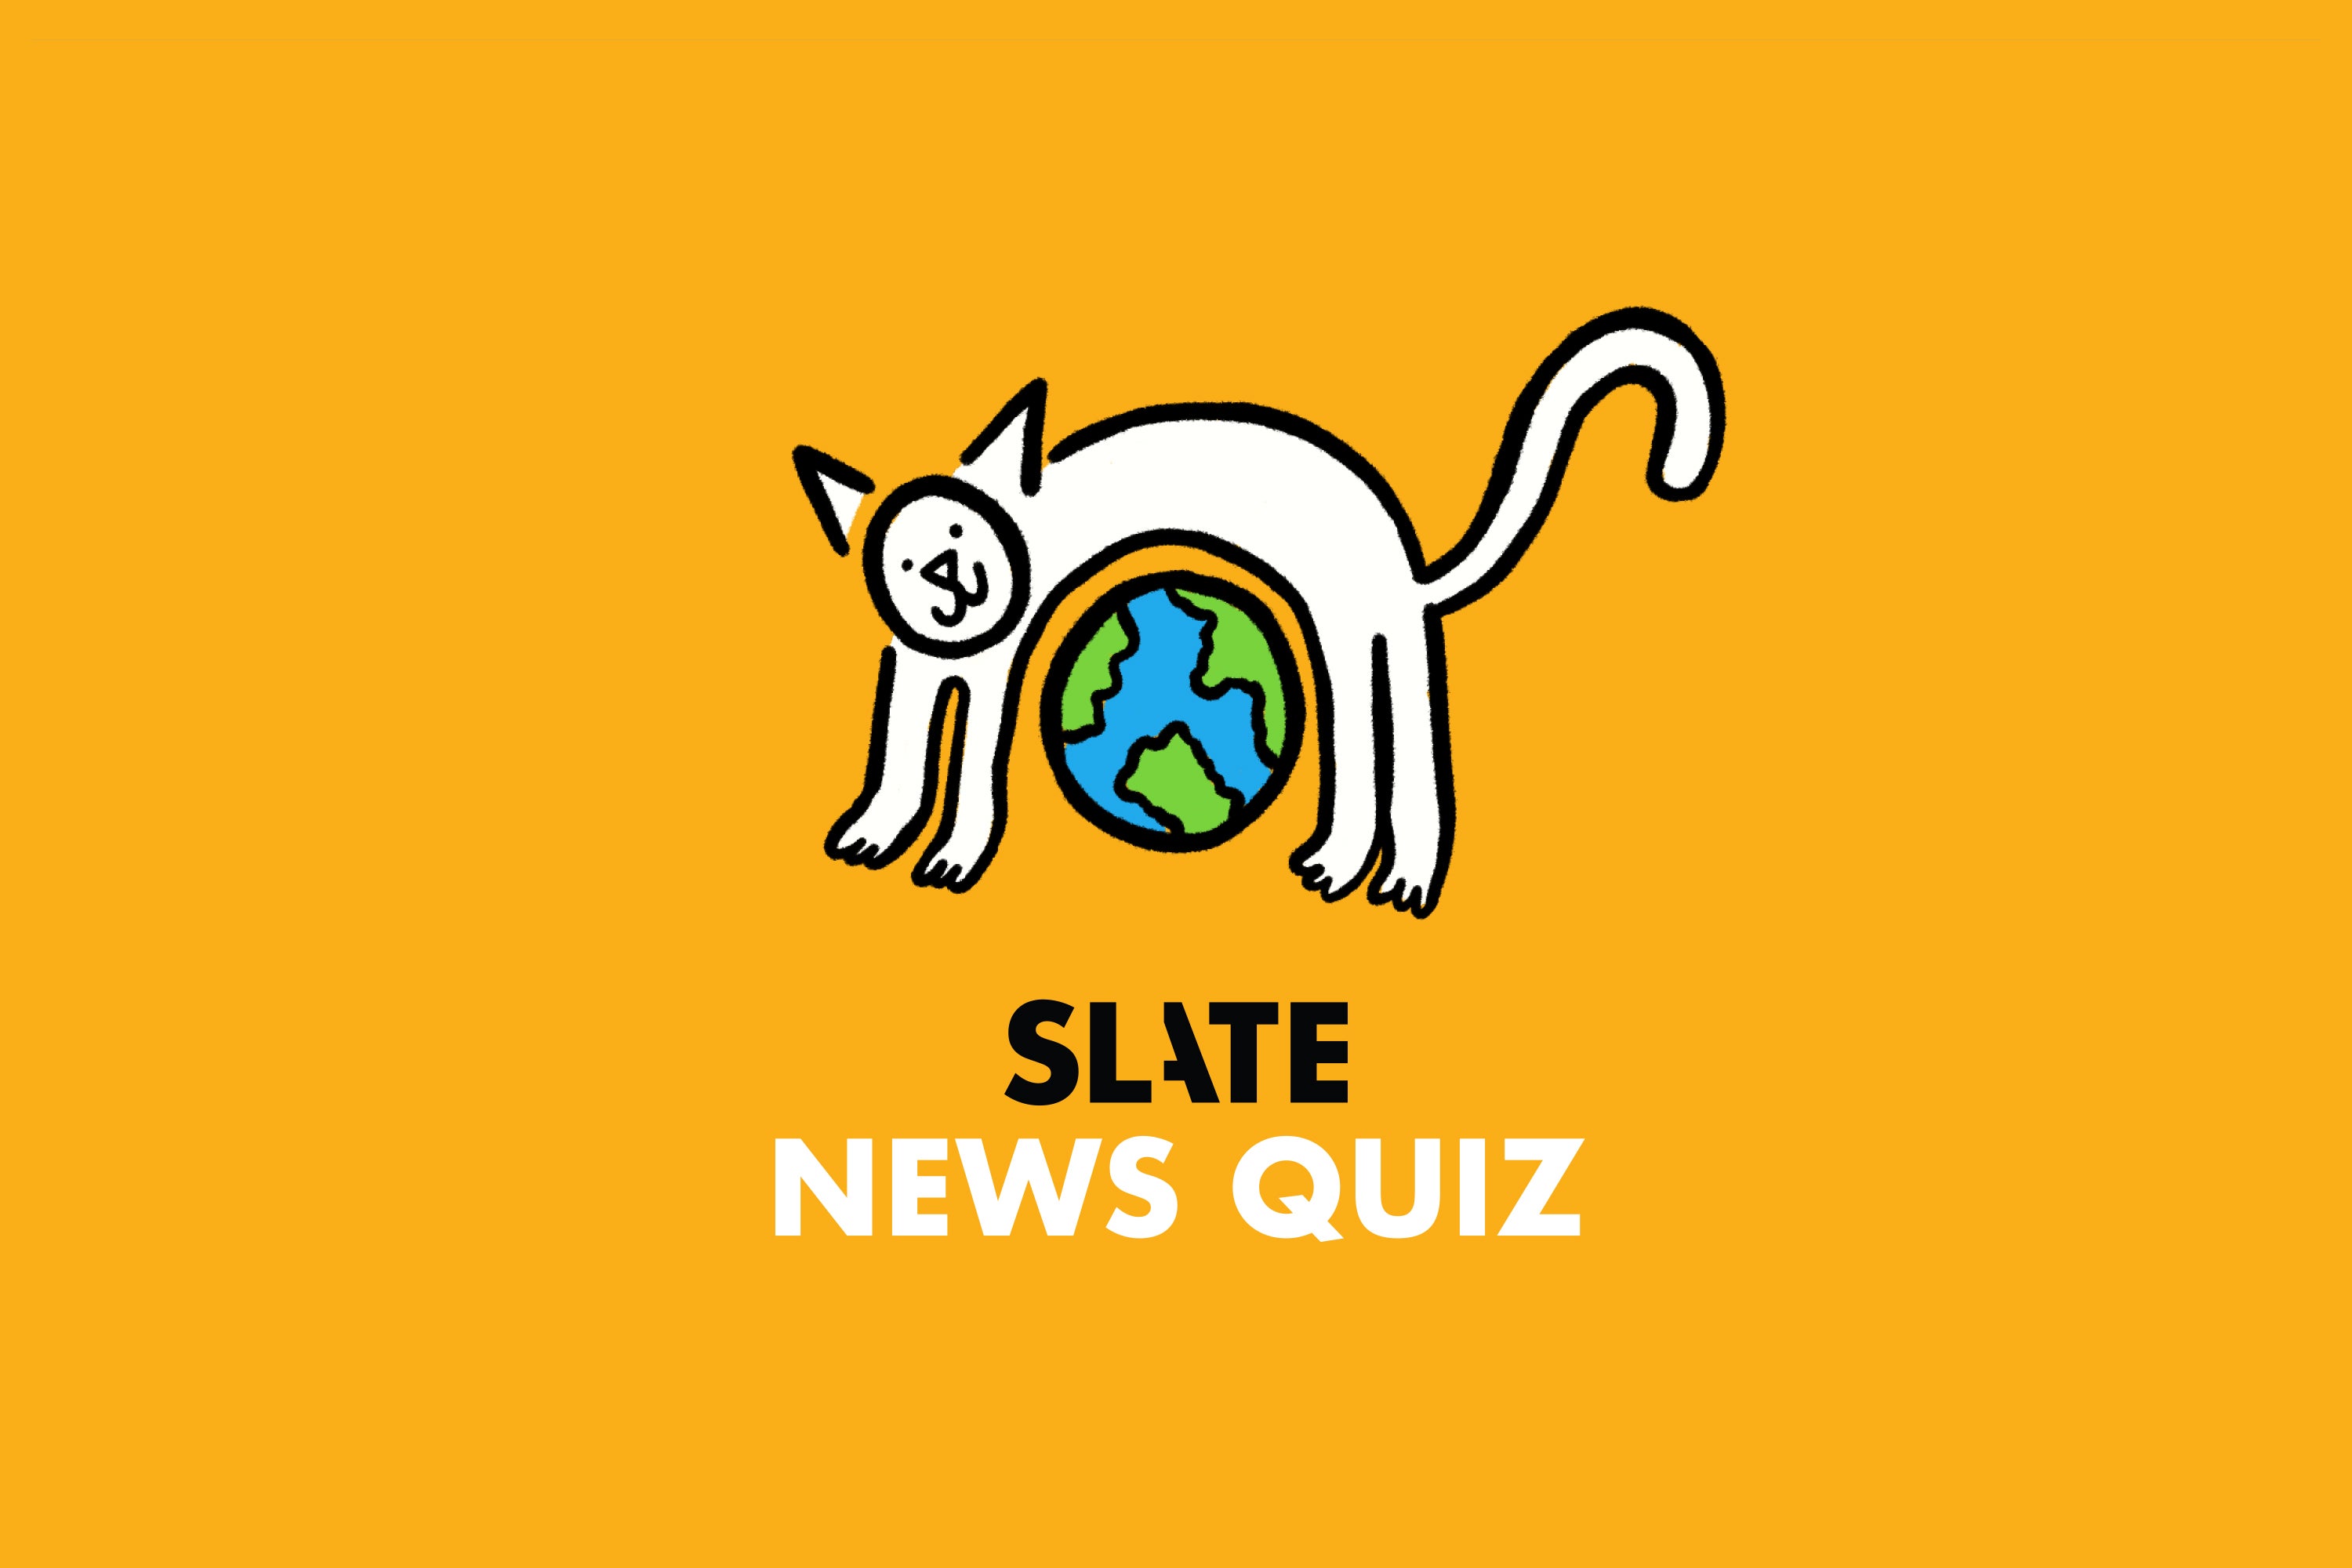 Think You’re Smarter Than a Slate Staff Writer? Find Out With This Week’s News Quiz. Ray Hamel